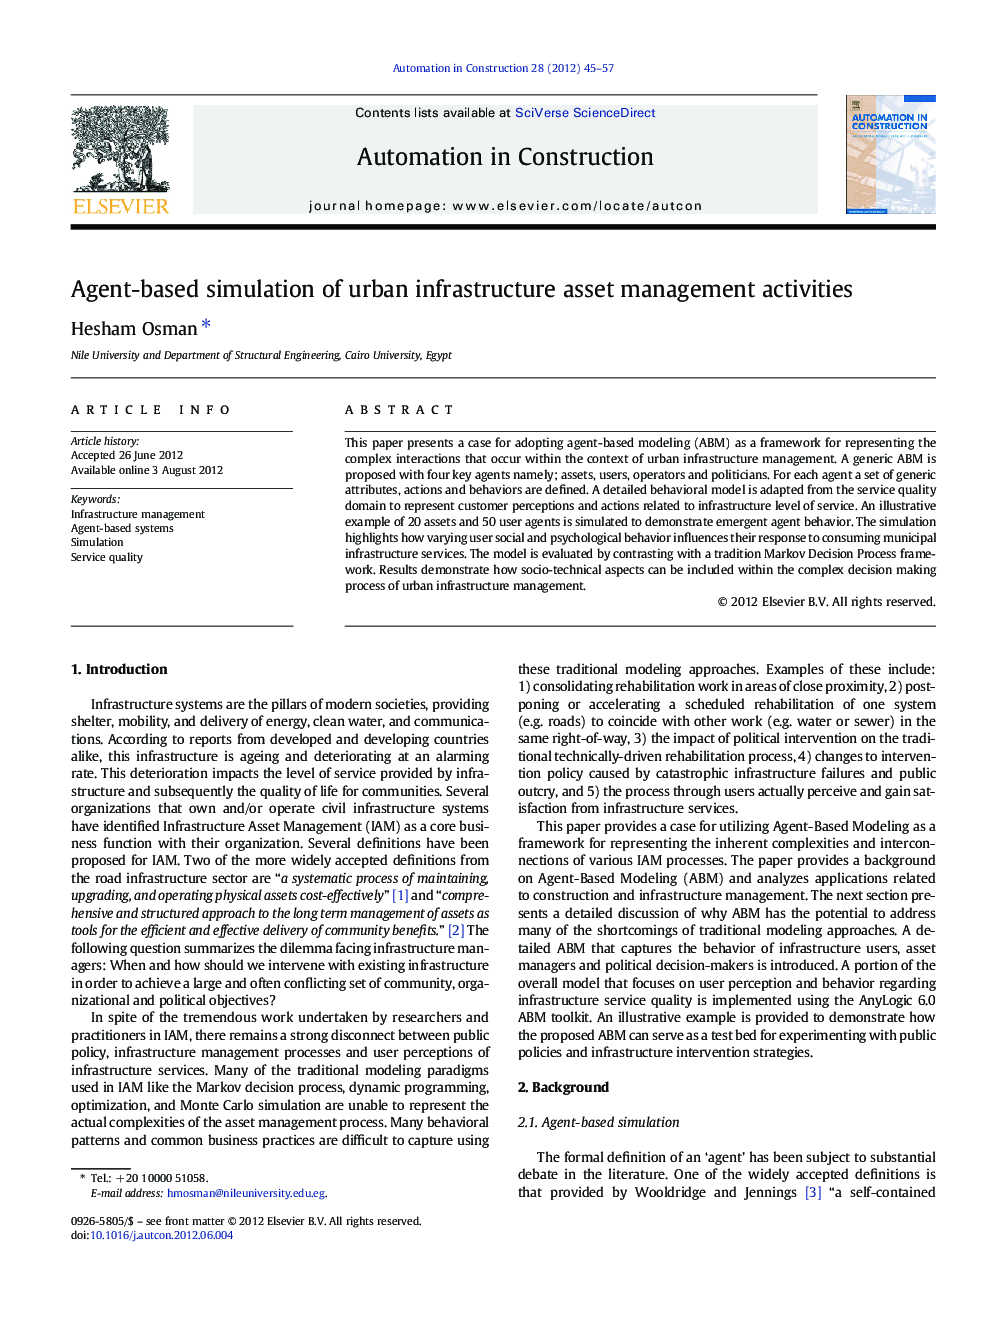 Agent-based simulation of urban infrastructure asset management activities